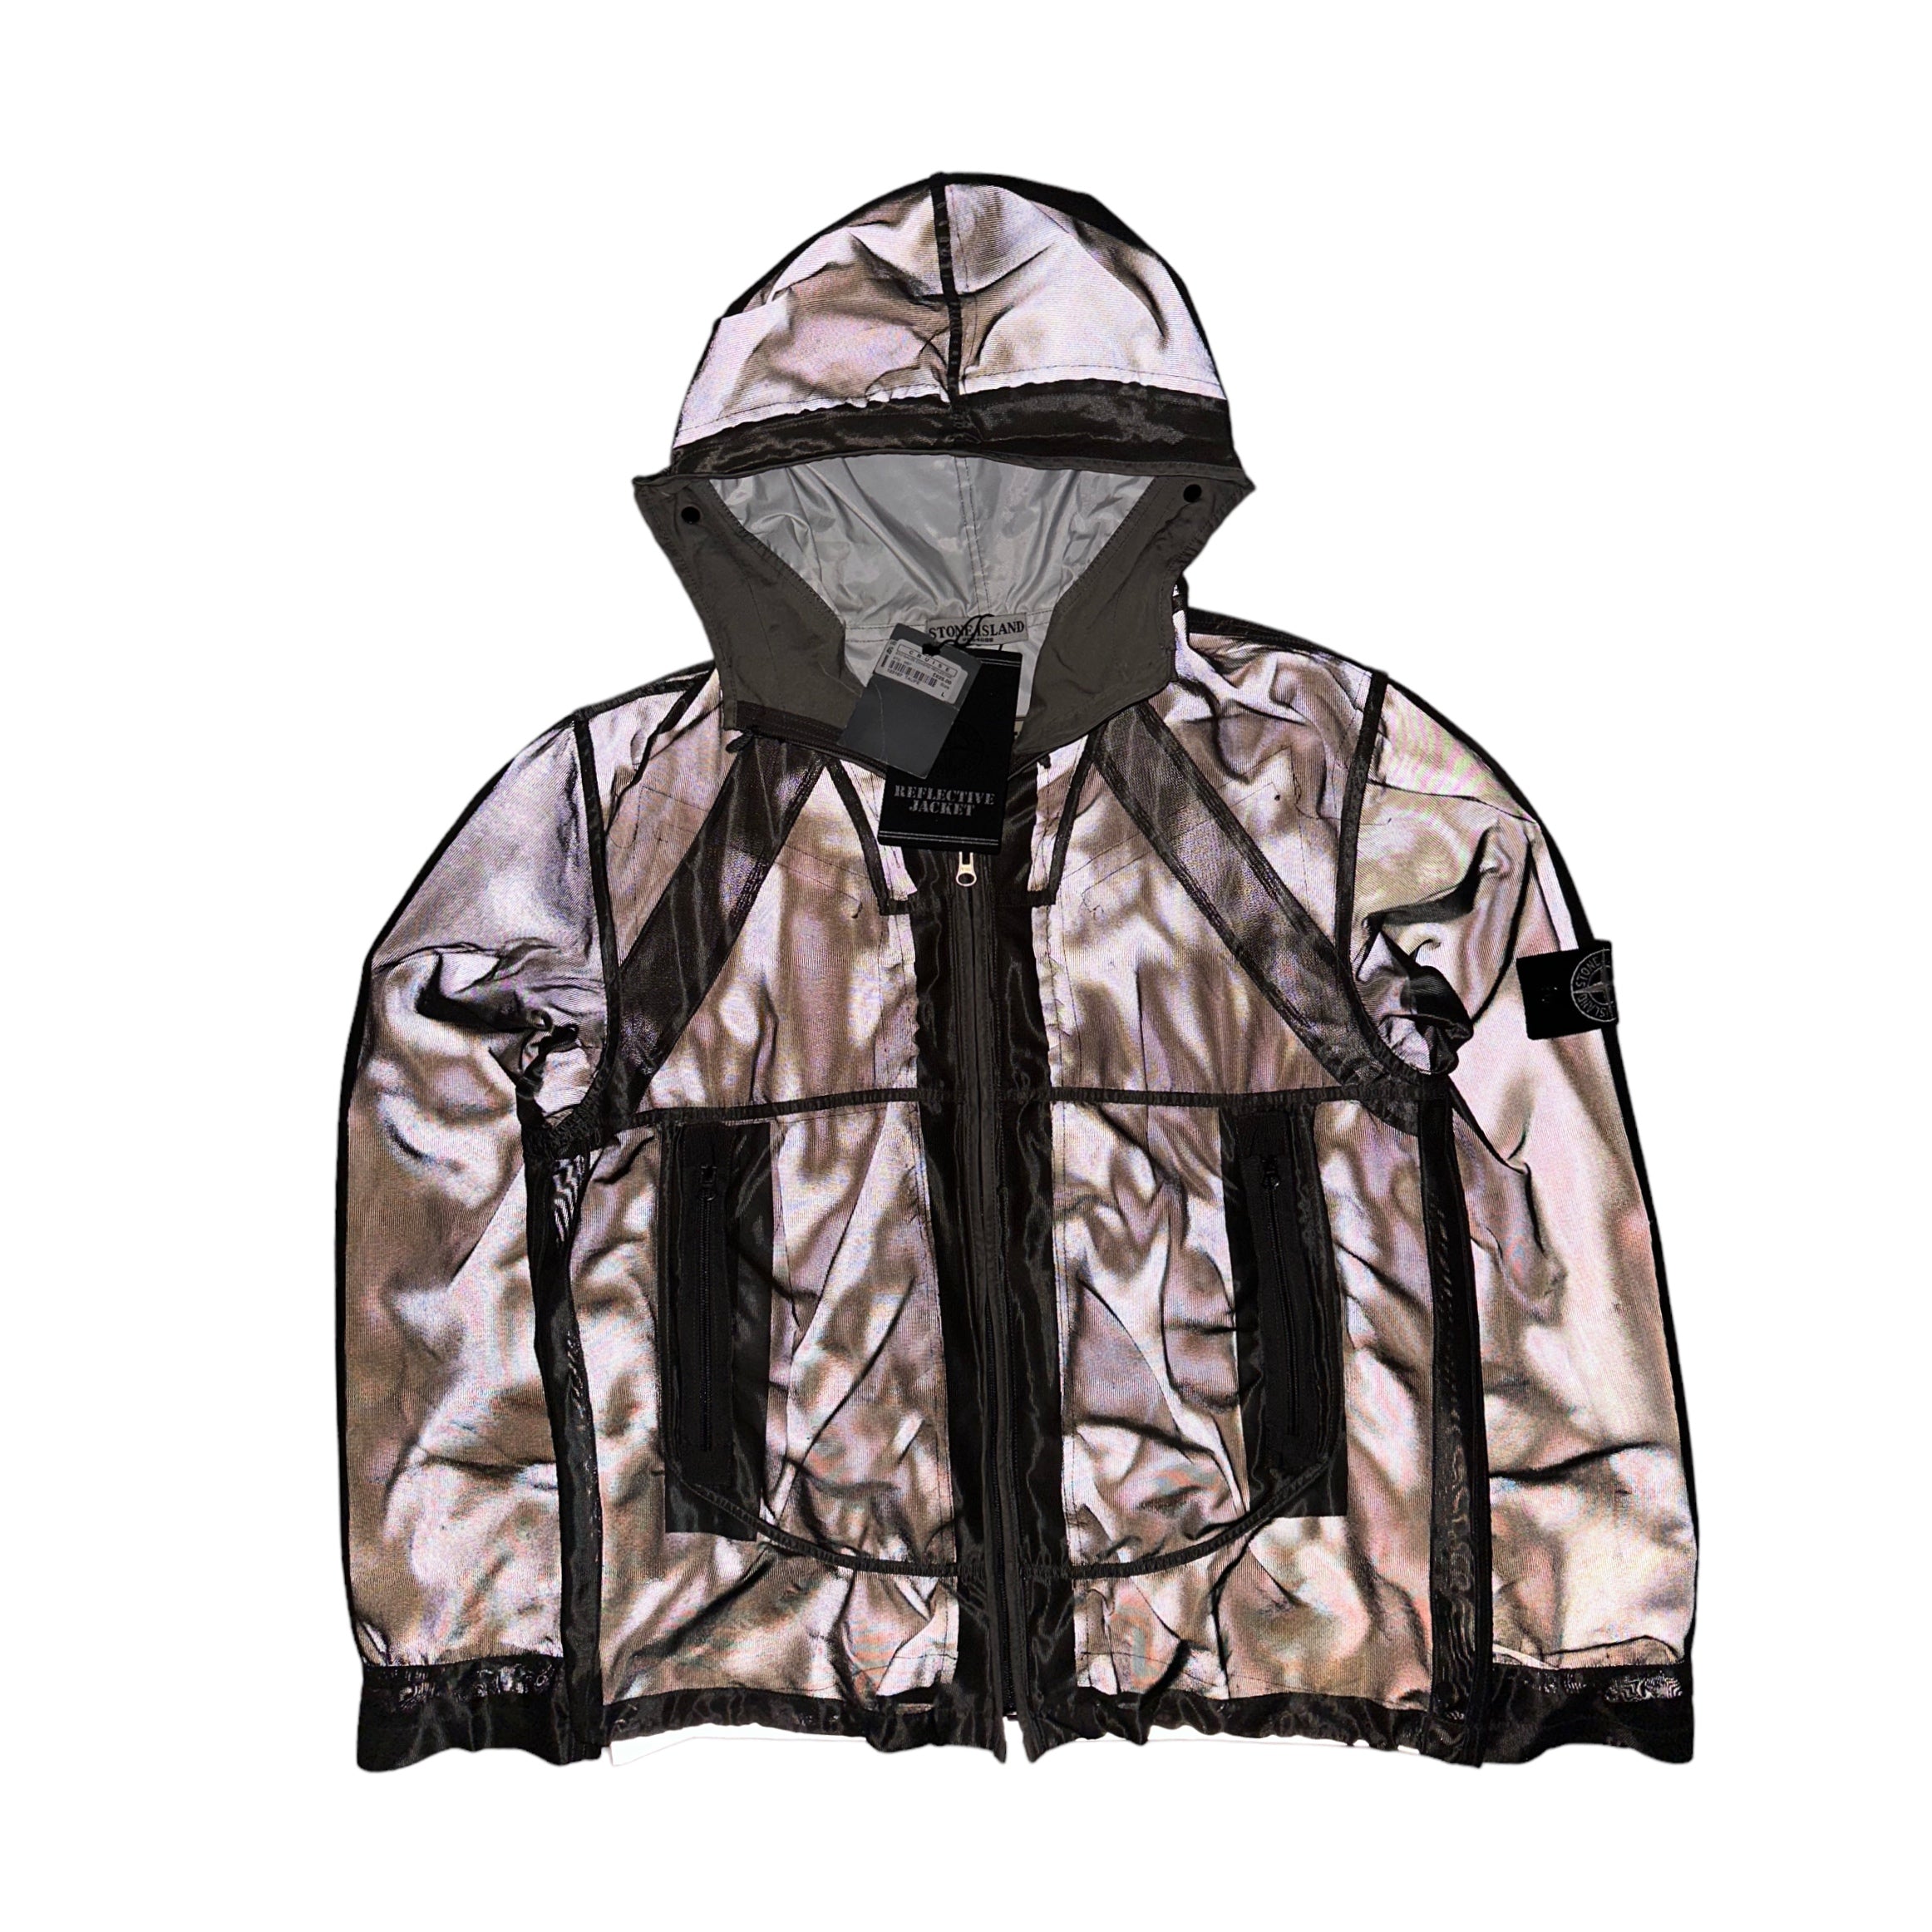 Stone Island Special Process Mesh Reflective Jacket from S/S 2007